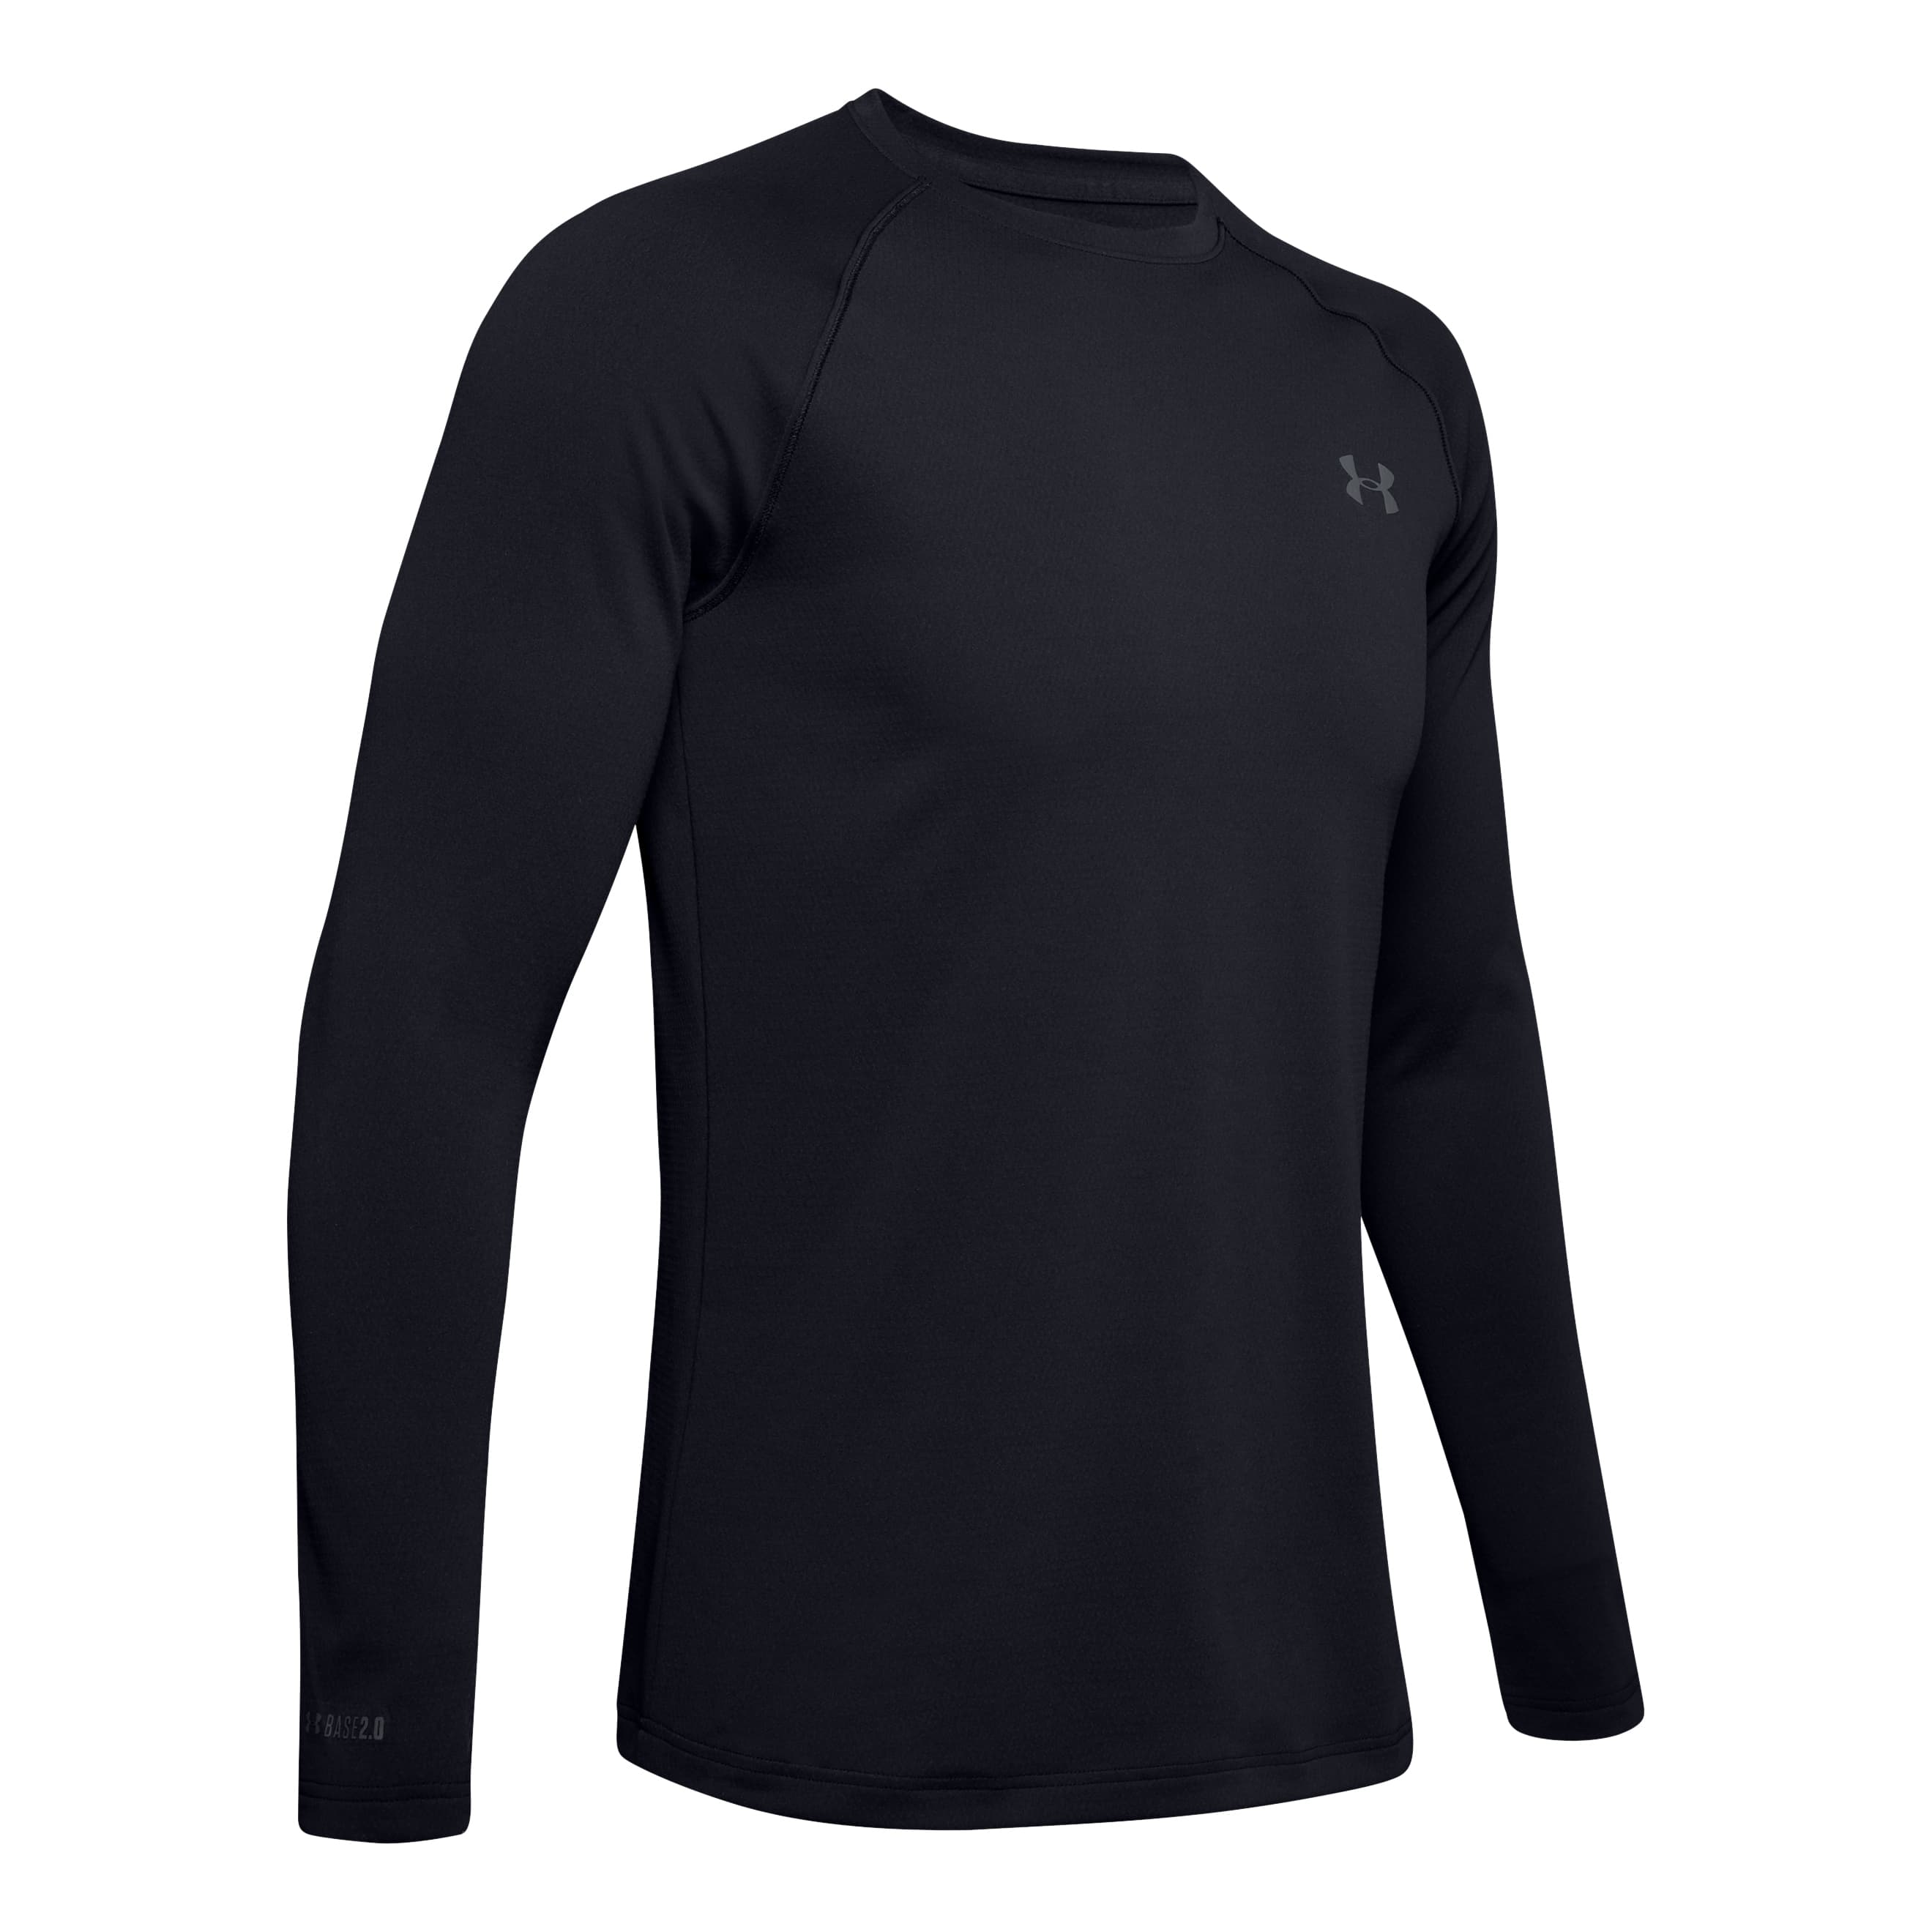 Under Armour® Men’s ColdGear® Base 2.0 Series Packaged Long-Sleeve Crew ...